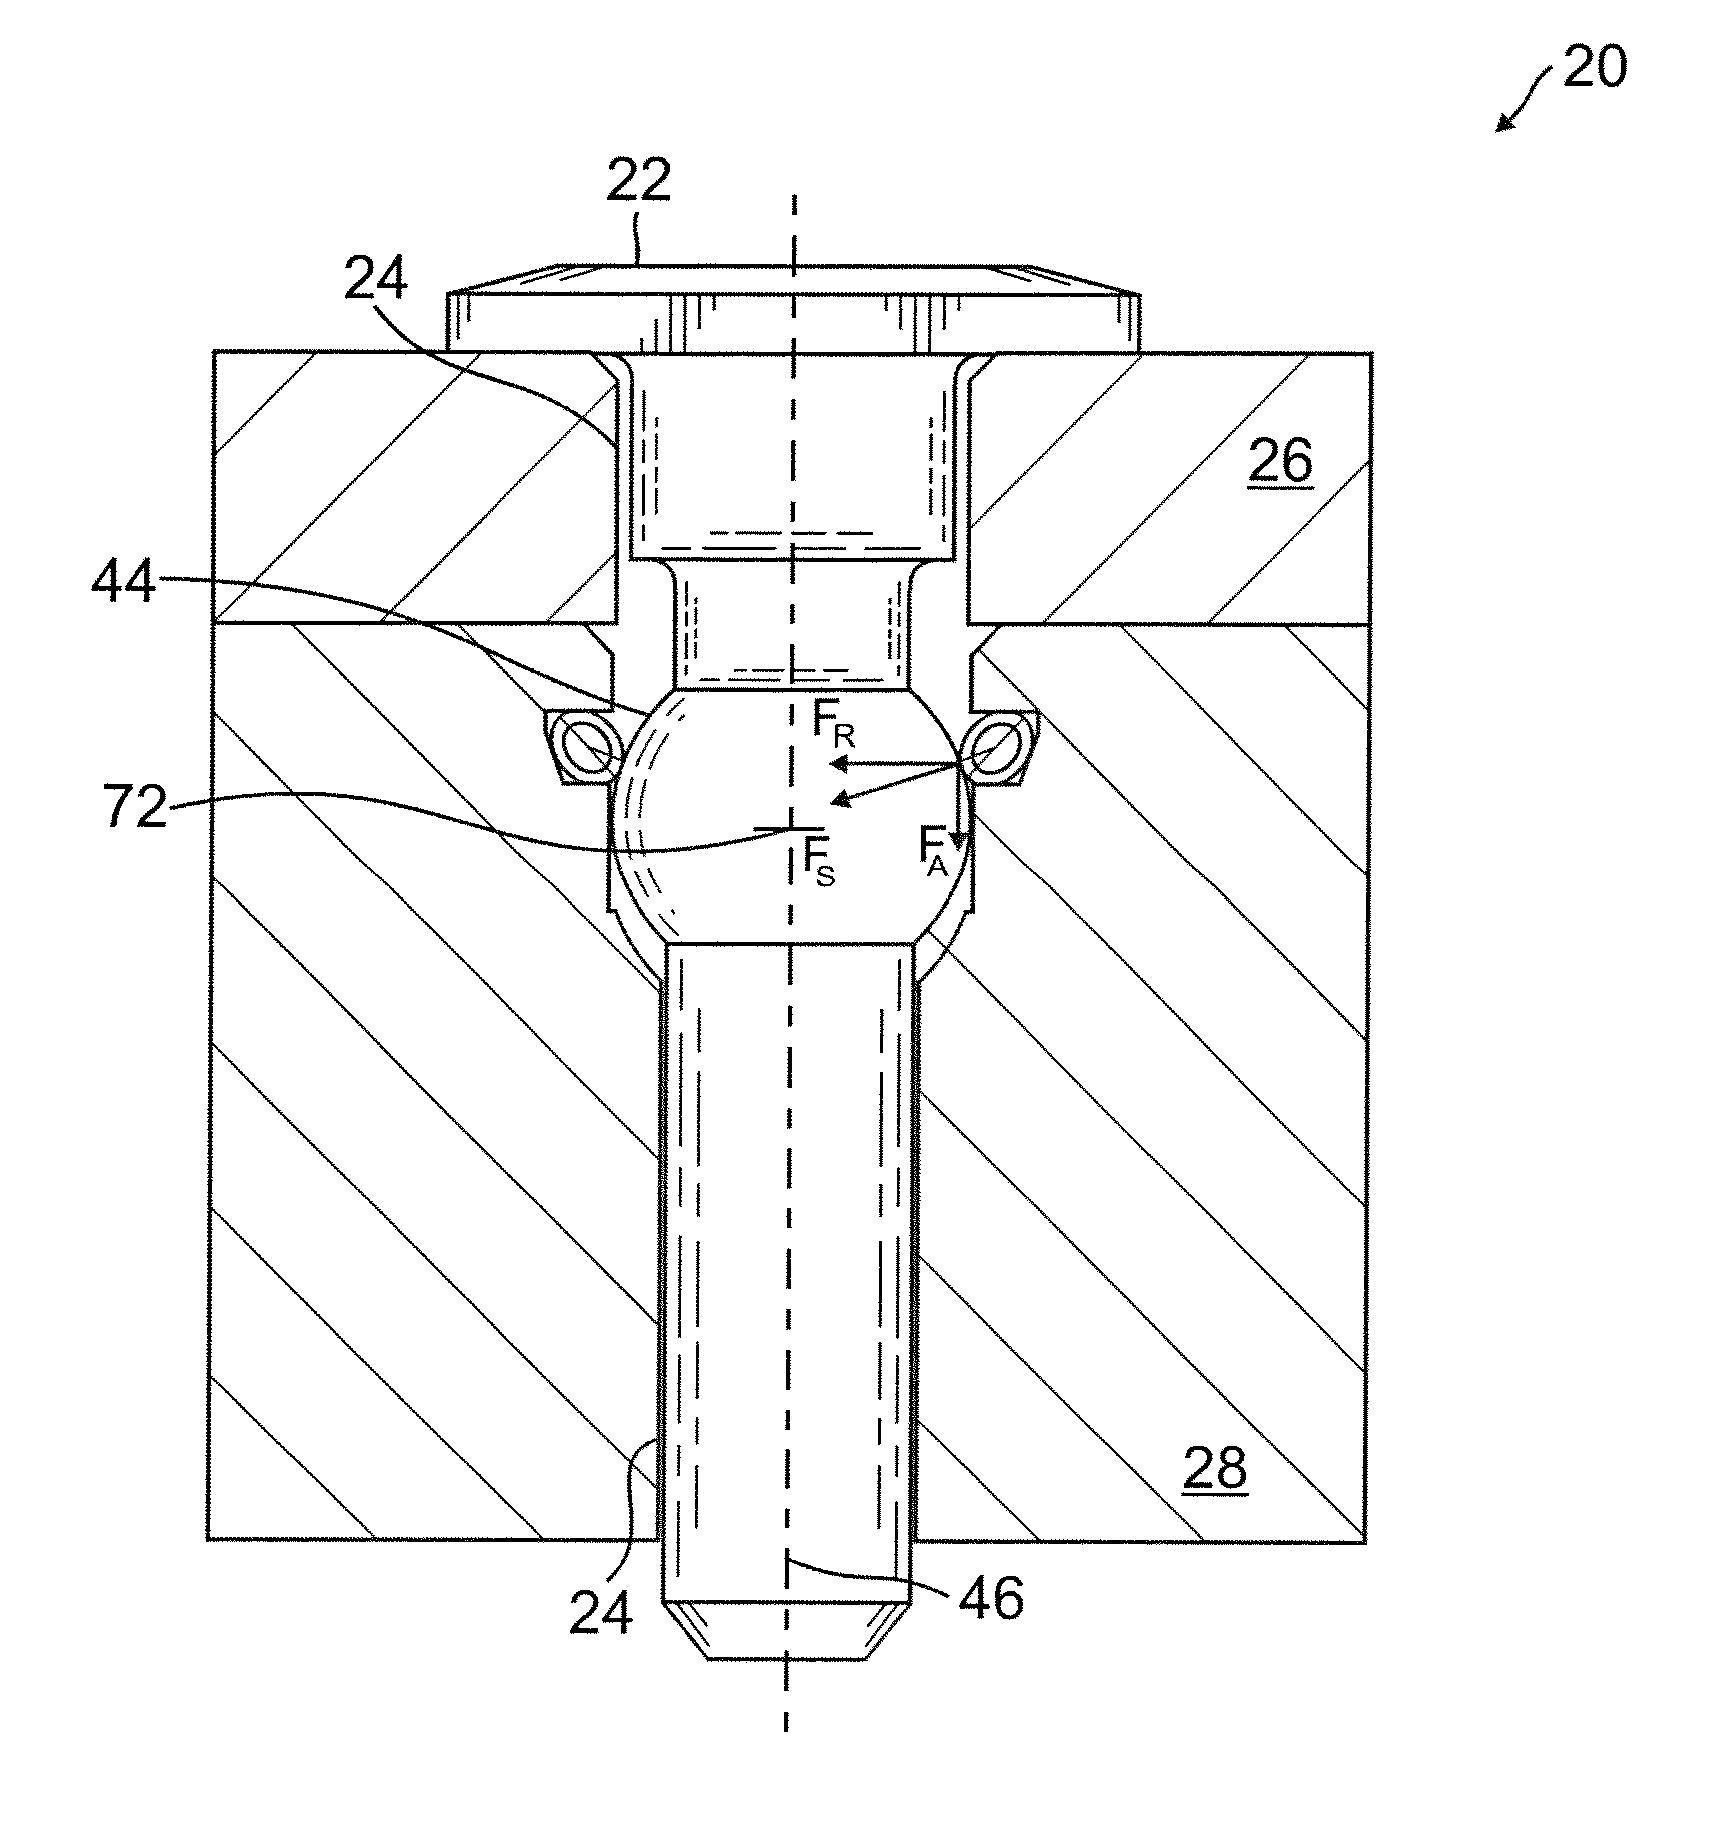 Apparatus including a pin connector for securing a first member and a second member to one another, and associated methods